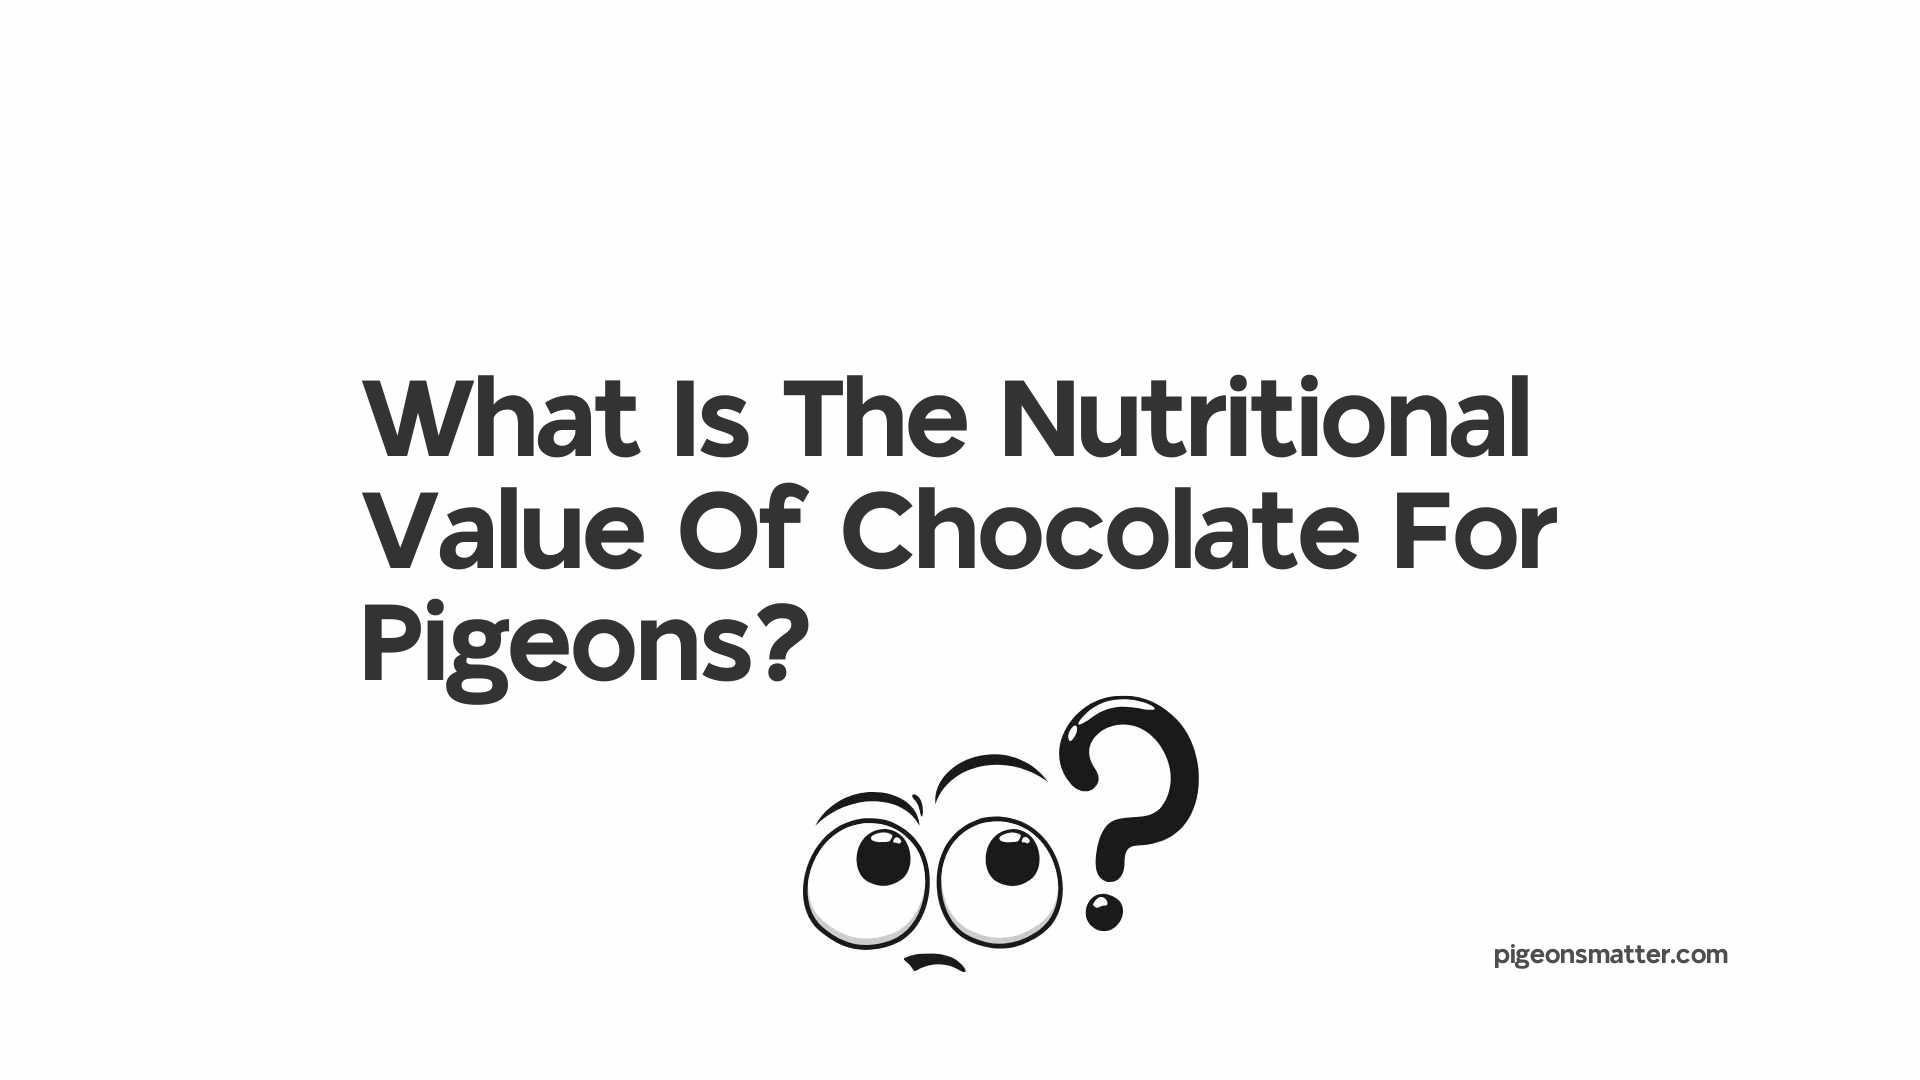 What Is The Nutritional Value Of Chocolate For Pigeons?